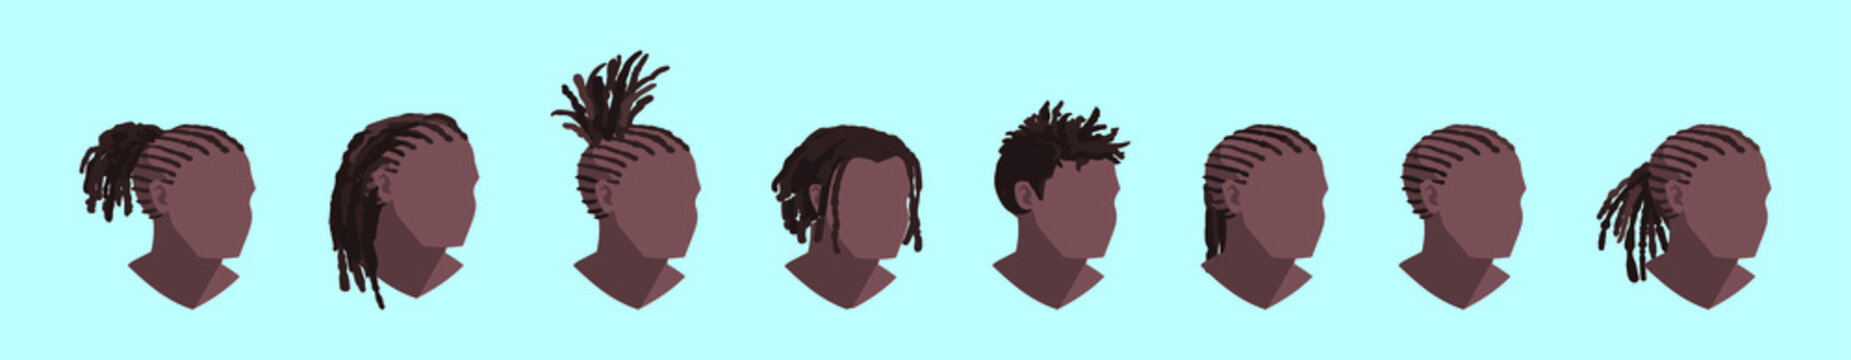 set of dread cartoon icon design template with various models. vector illustration isolated on blue background